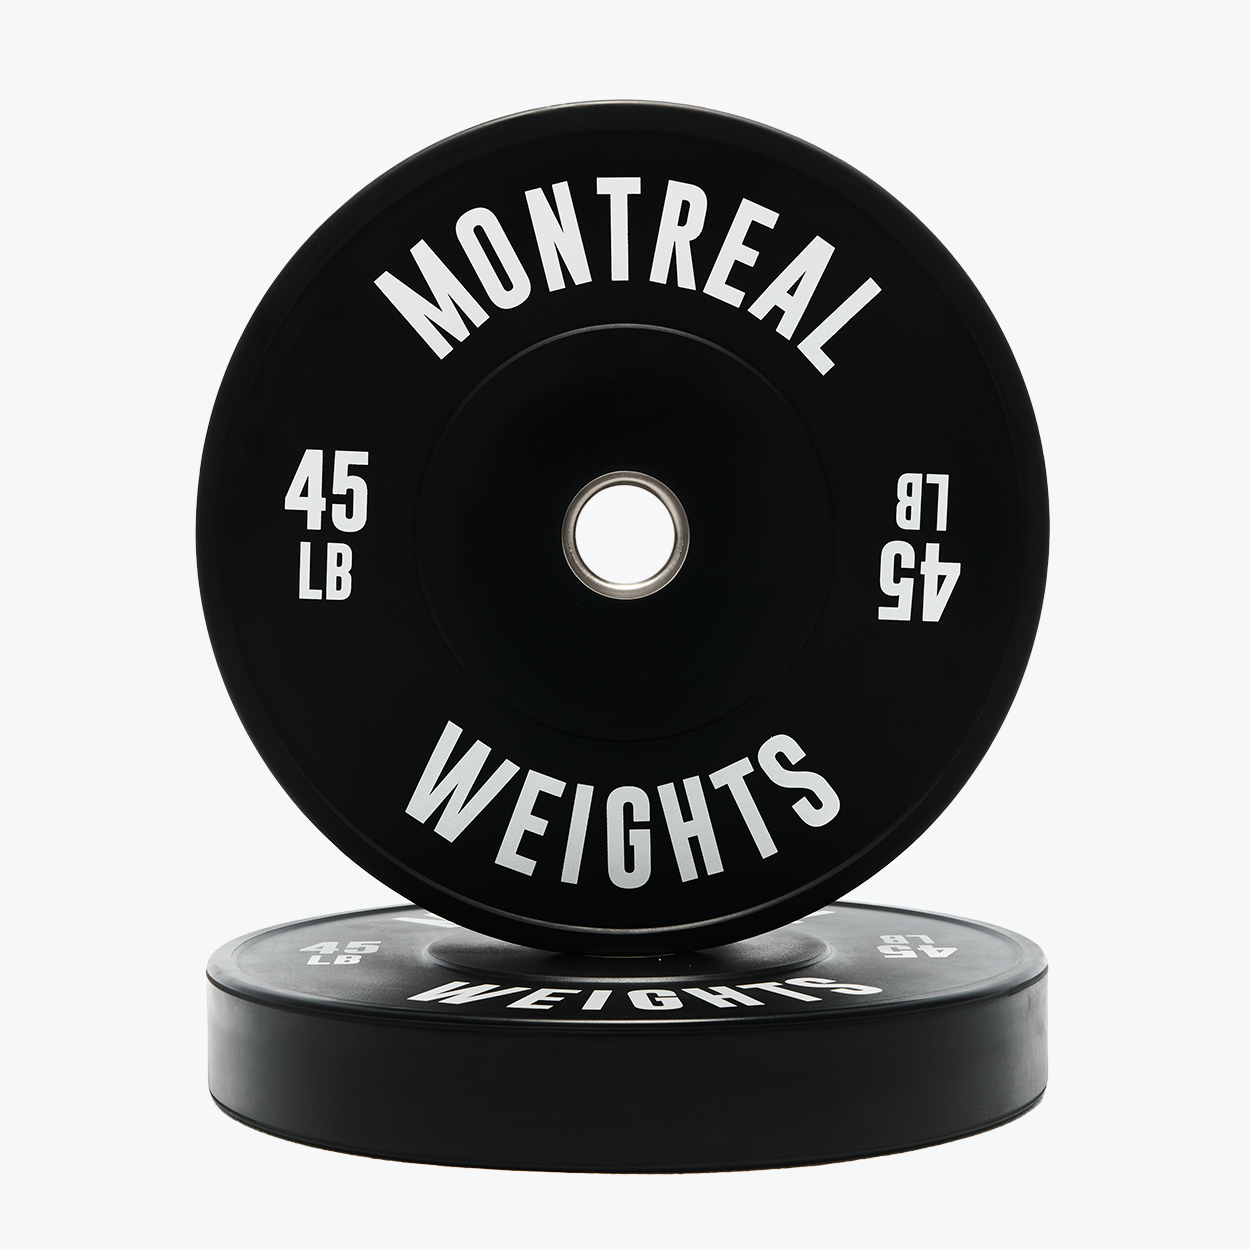 Bumper Plates Montreal Weights